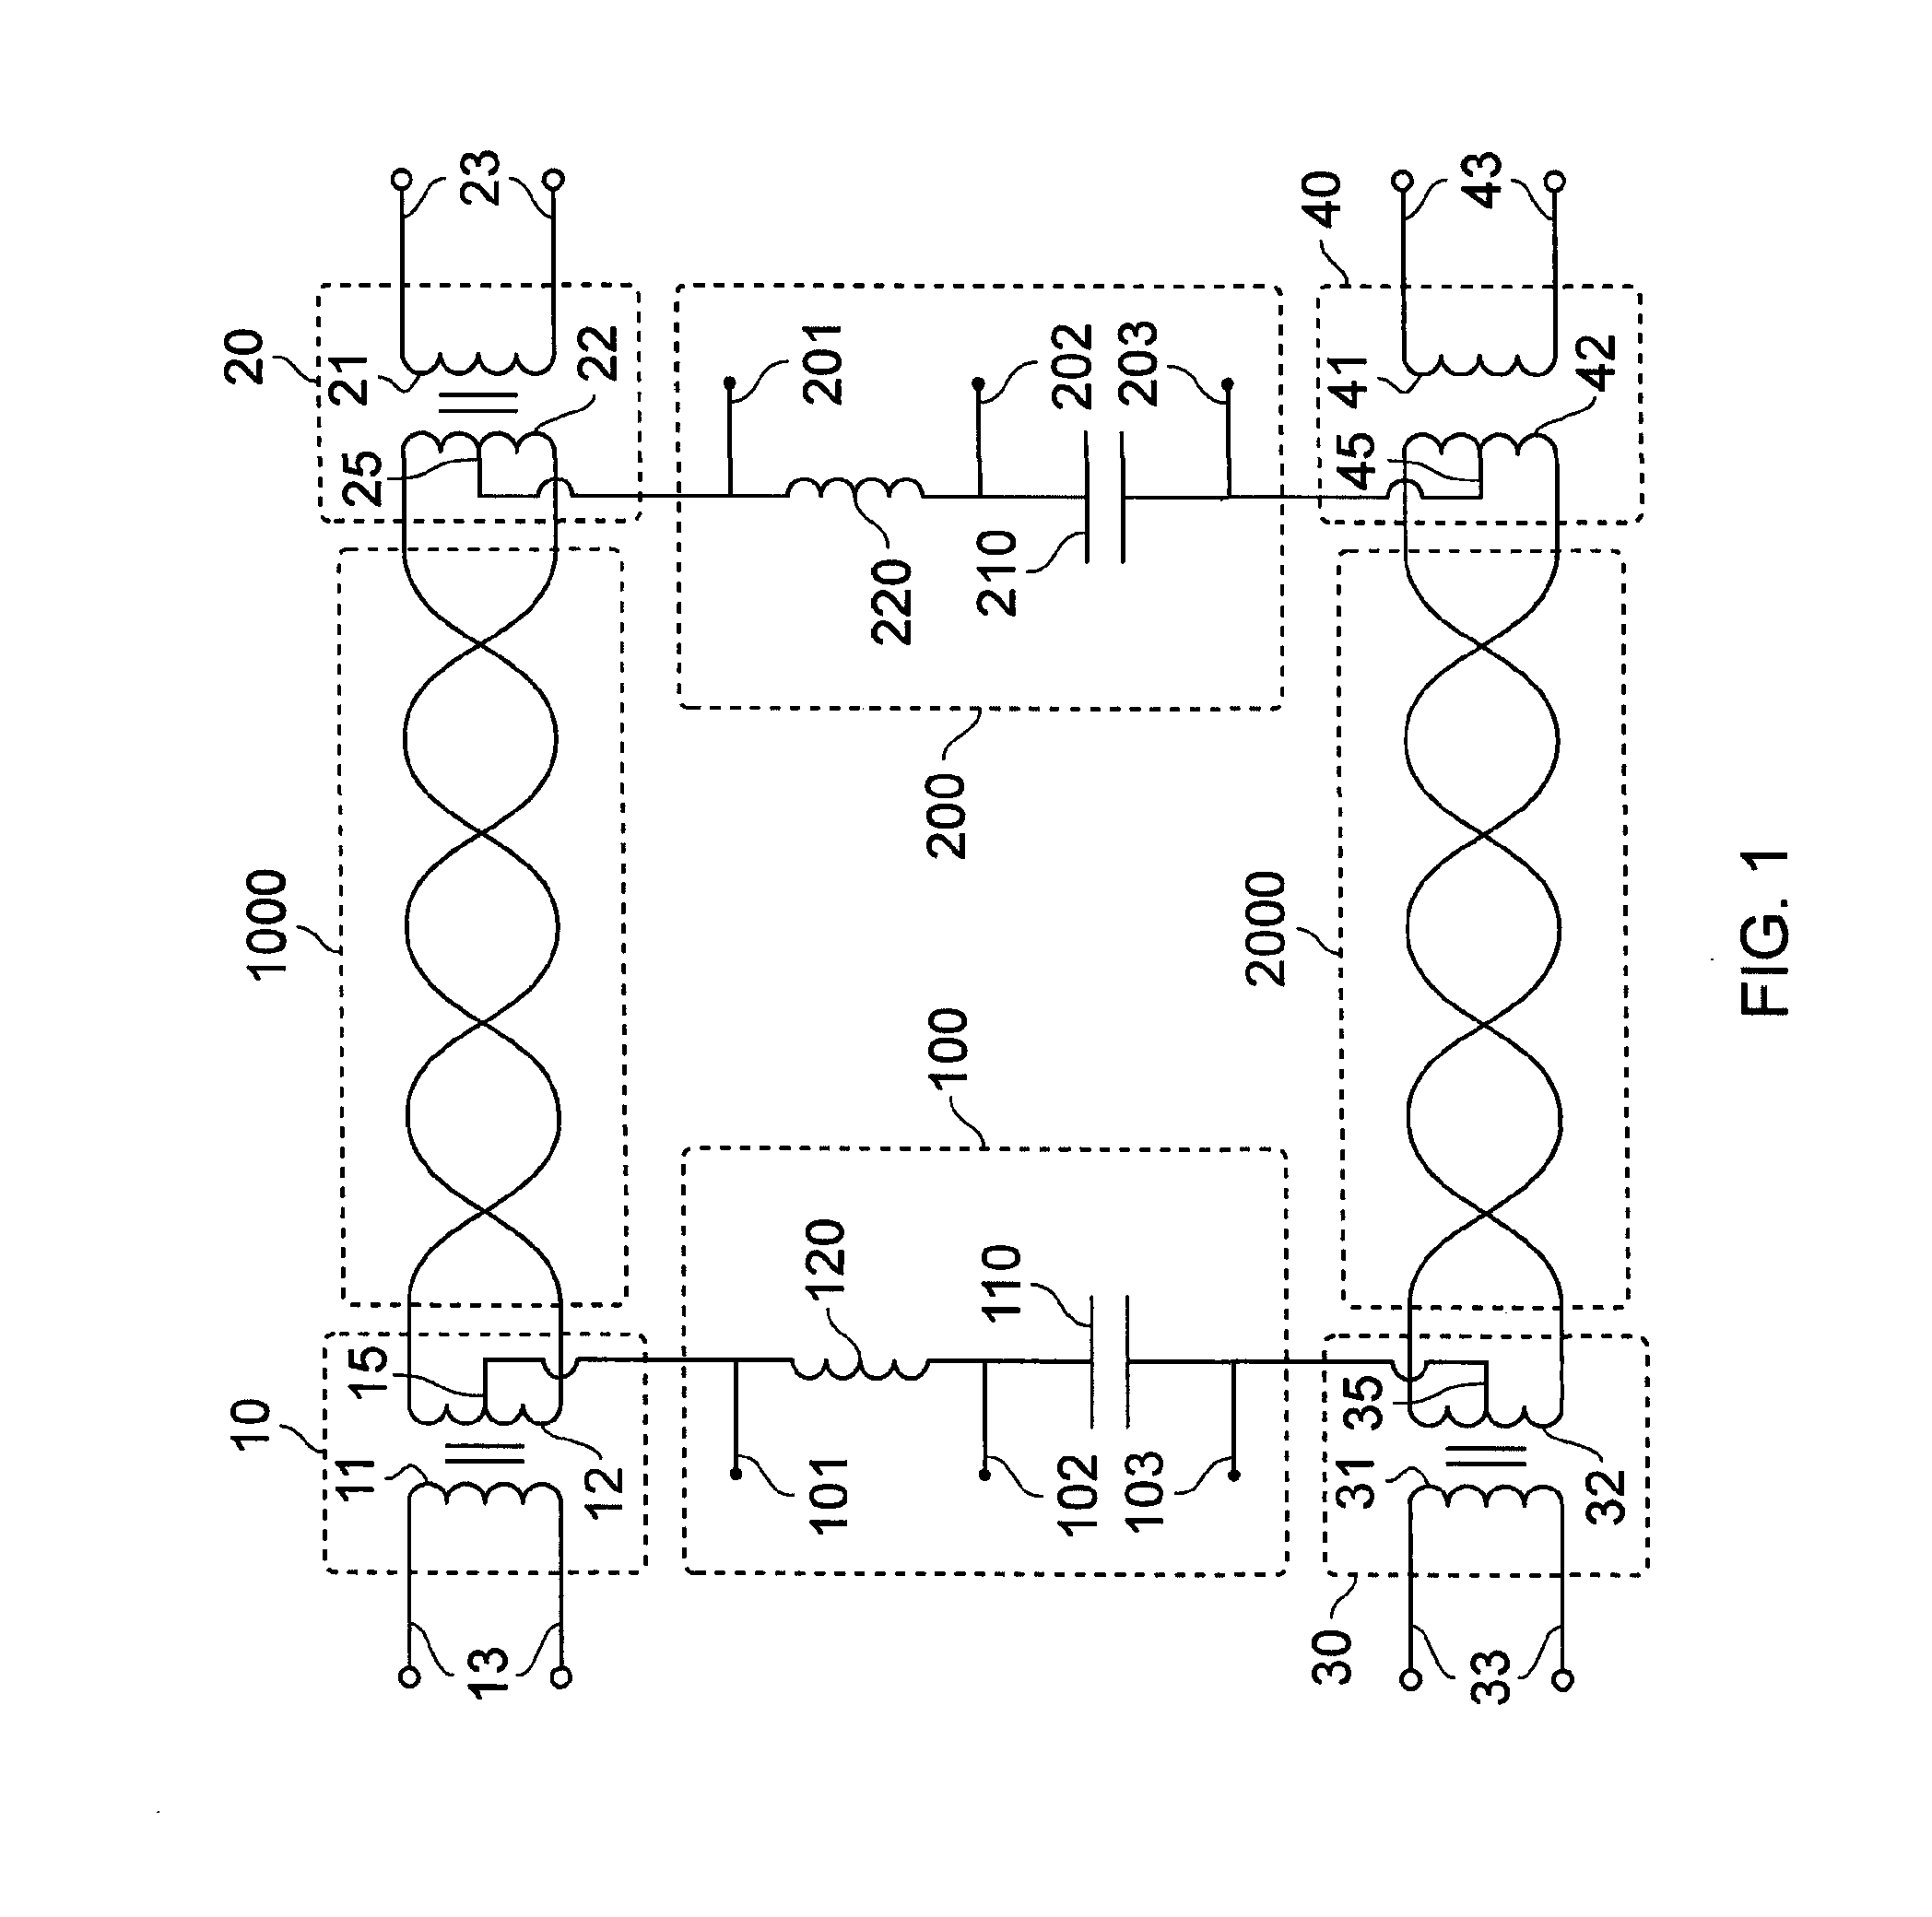 Electrical System Adapted to Transfer Data and Power Between Devices on a Network